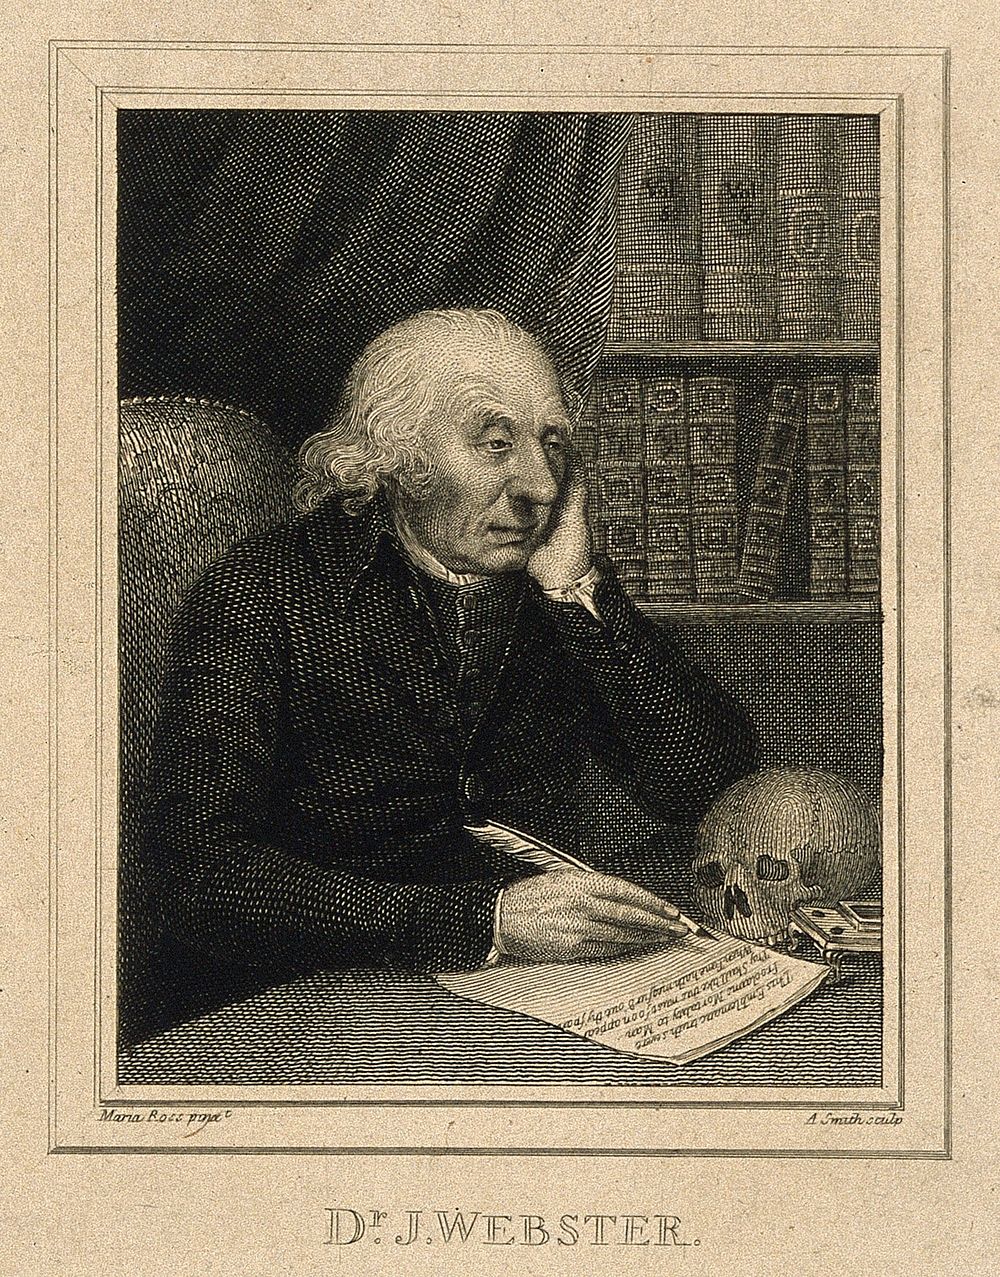 Joshua Webster. Line engraving by A. Smith, 1801, after Maria Ross.